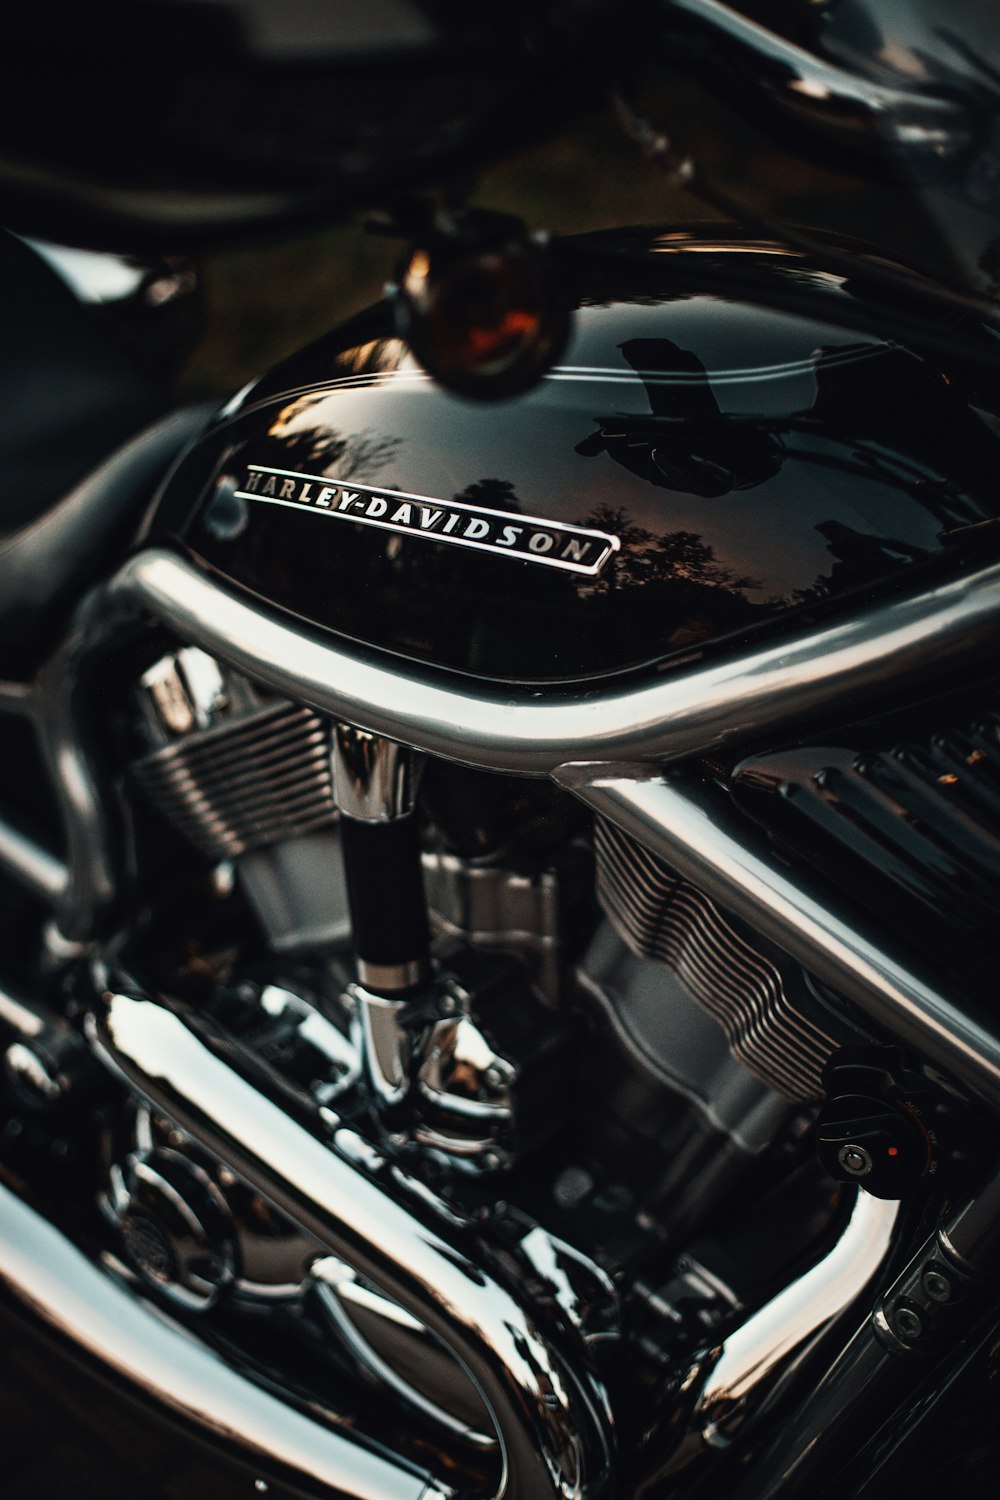 close up of a motorcycle